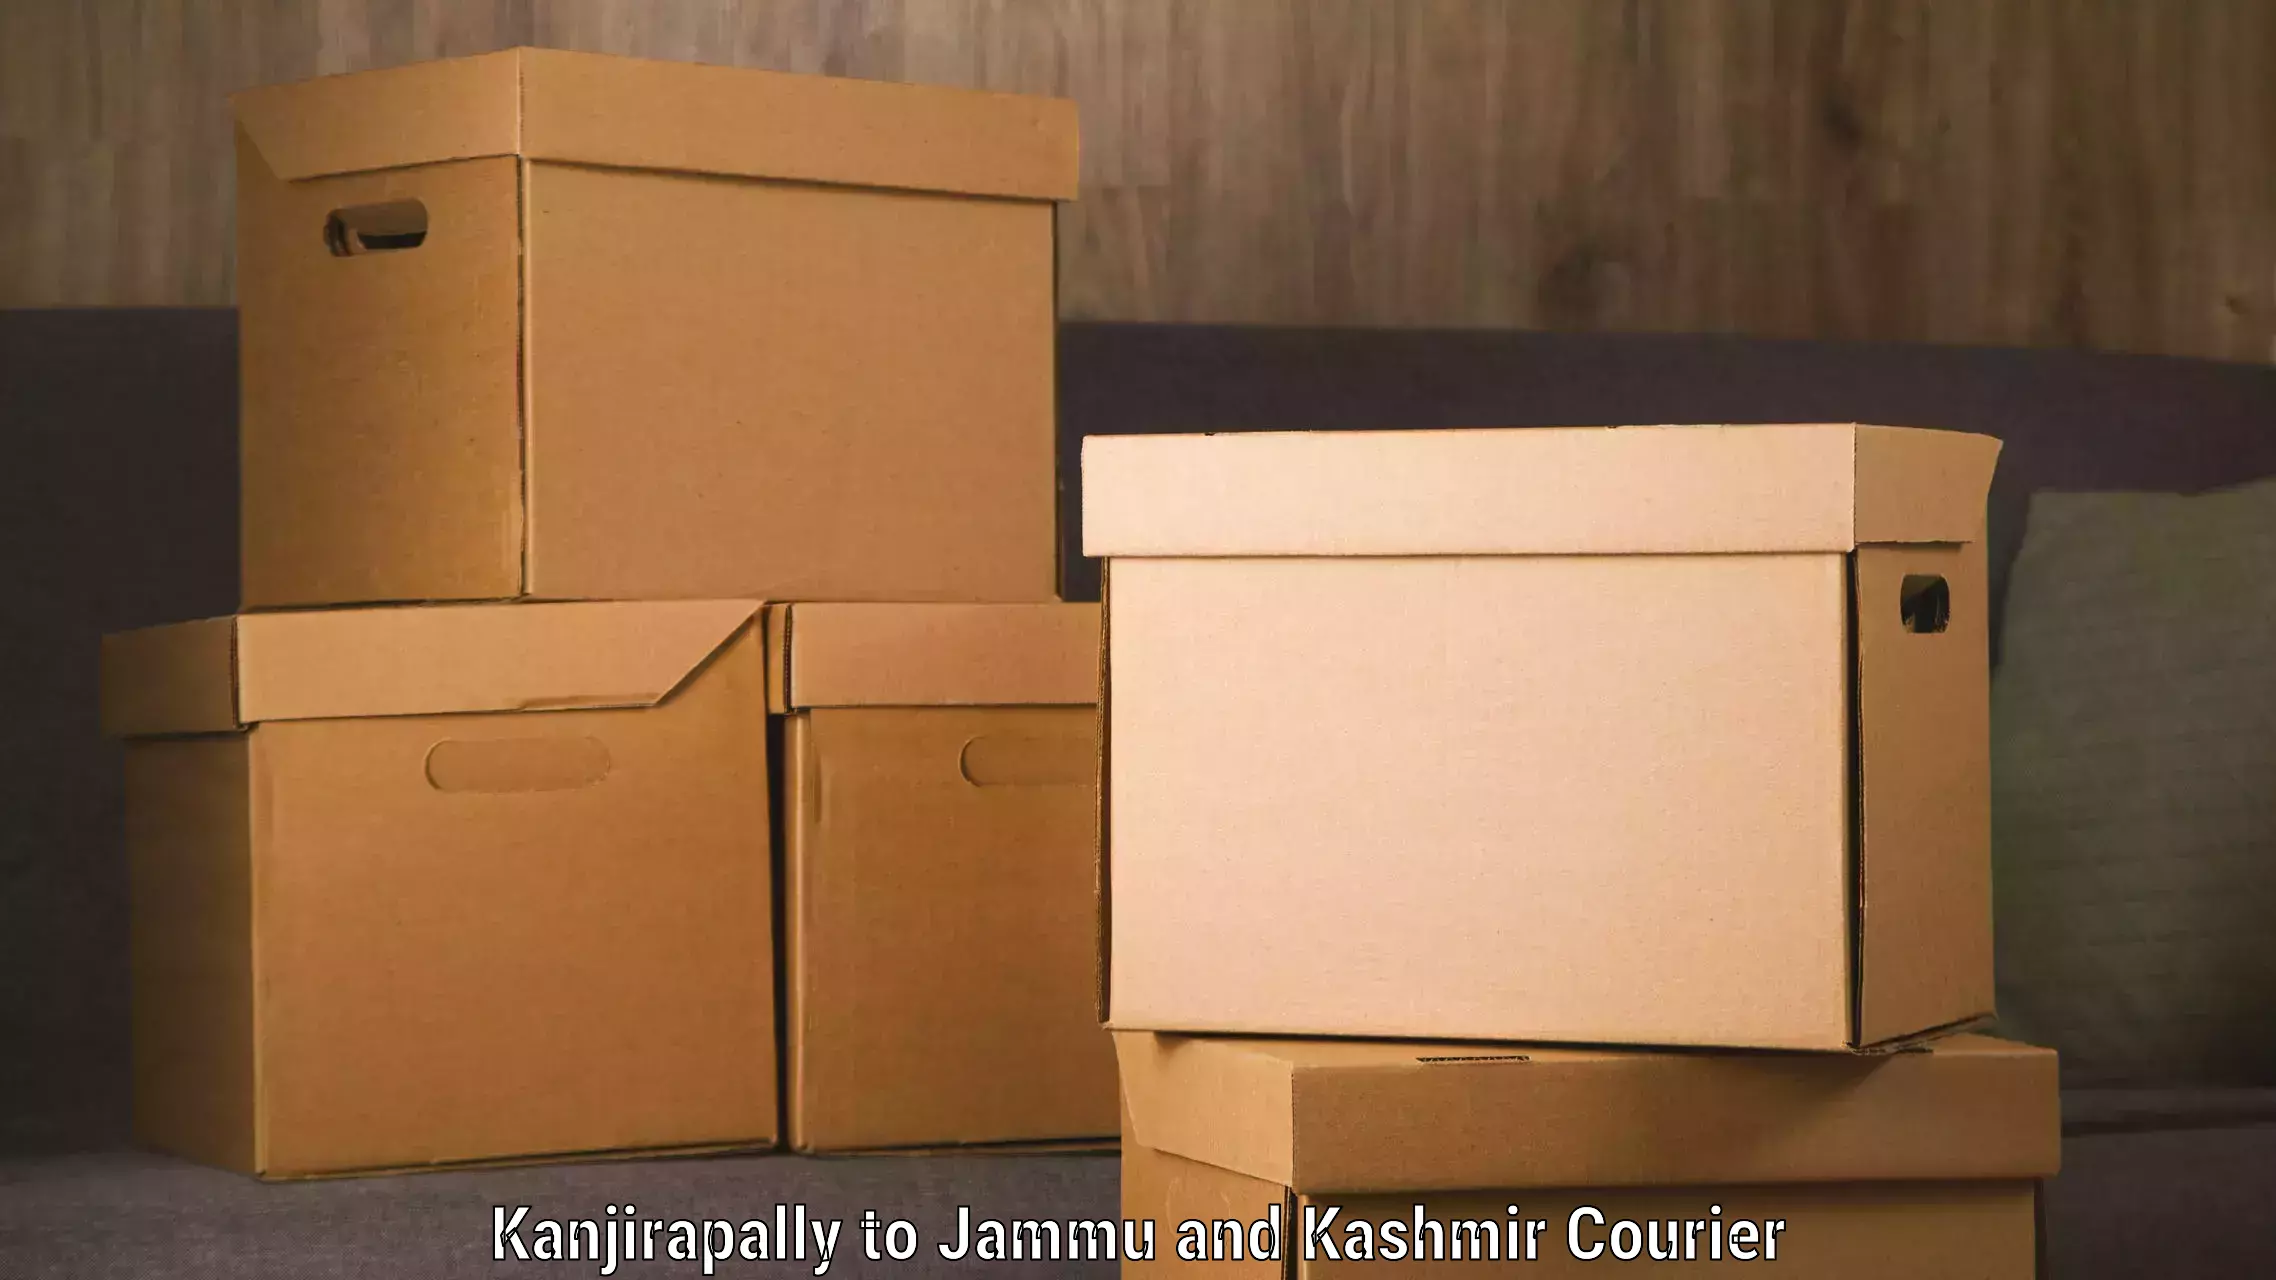 Package delivery network Kanjirapally to Jammu and Kashmir